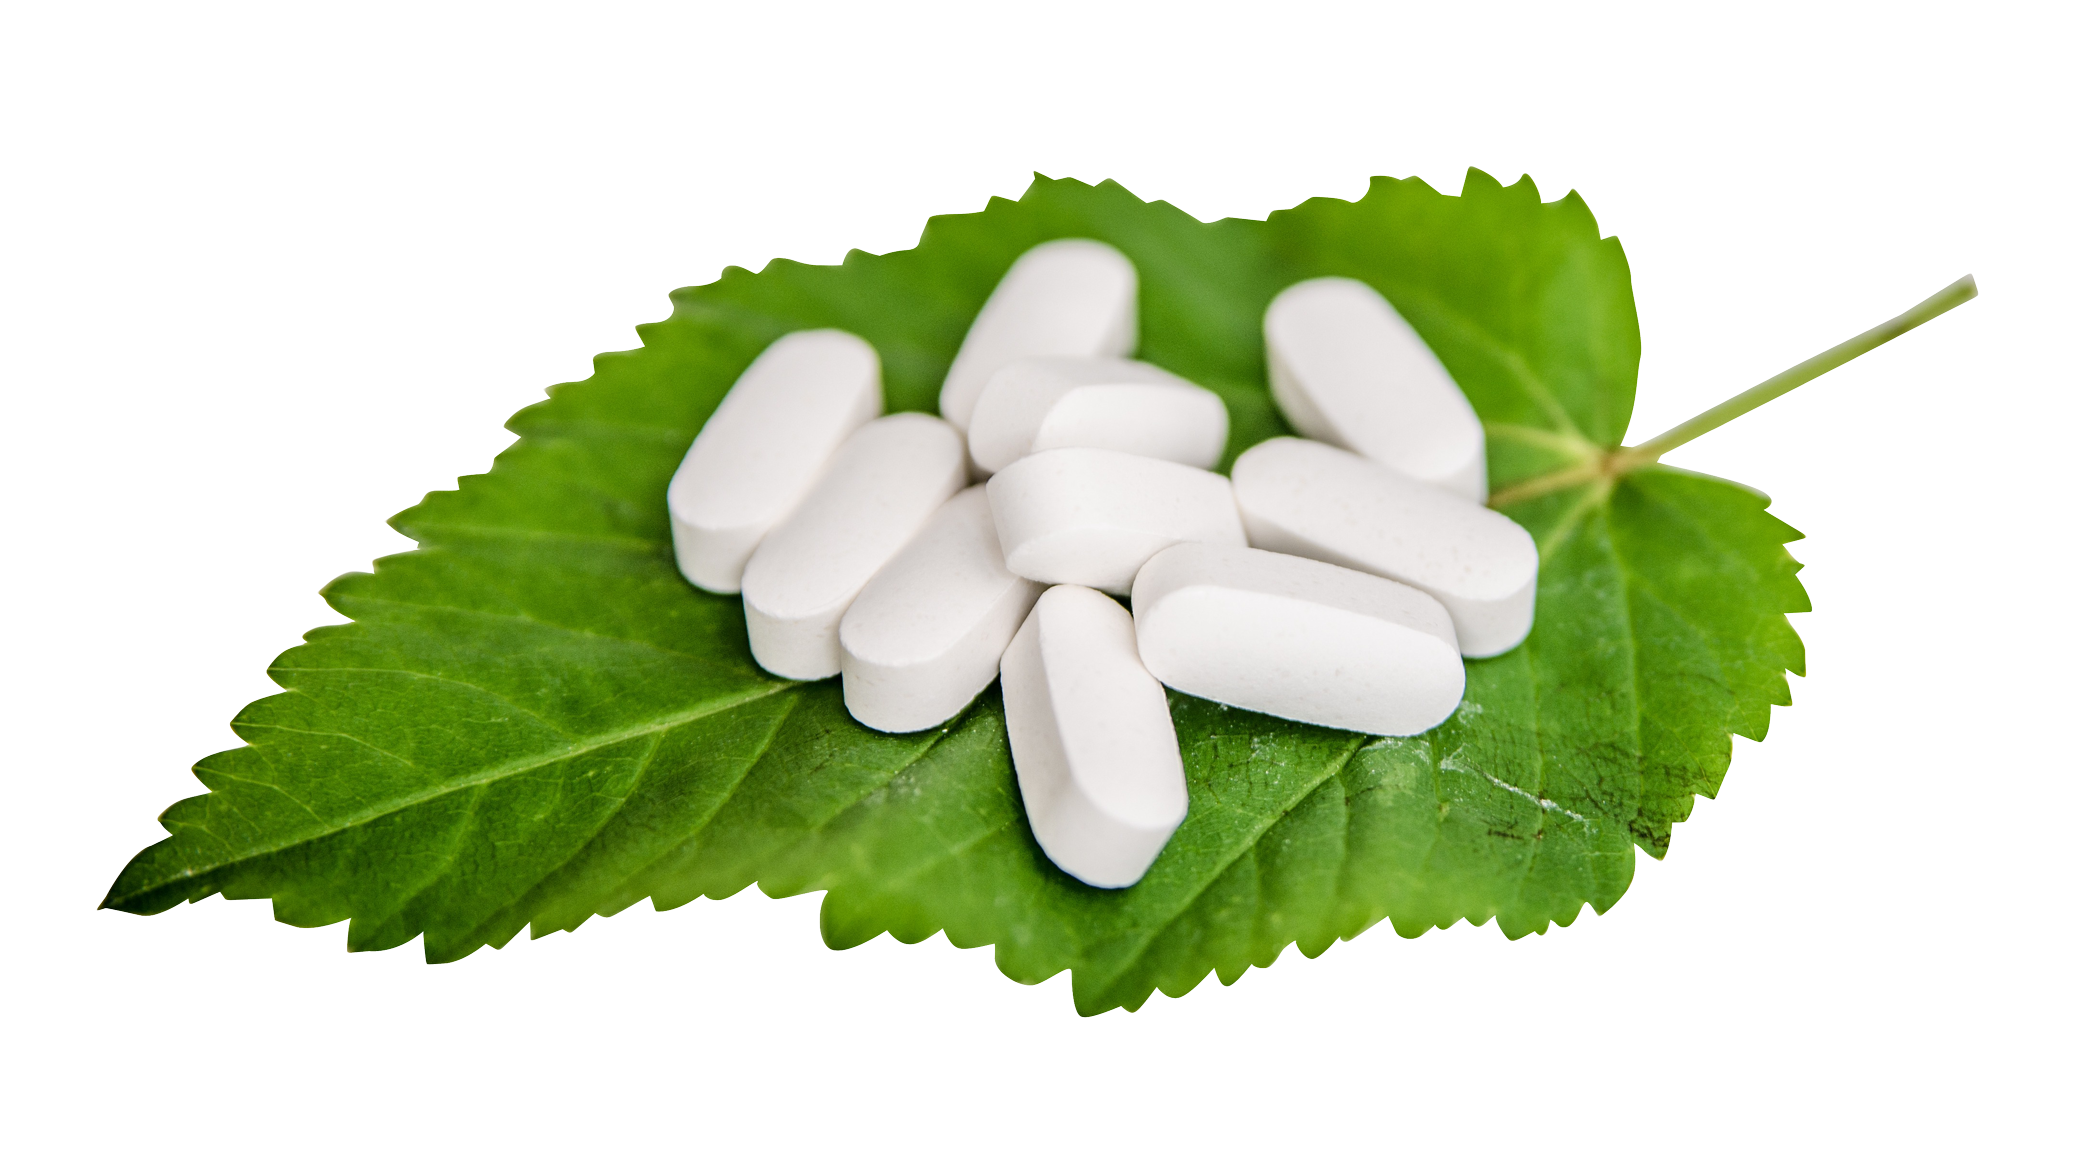 A Group Of Pills On A Leaf